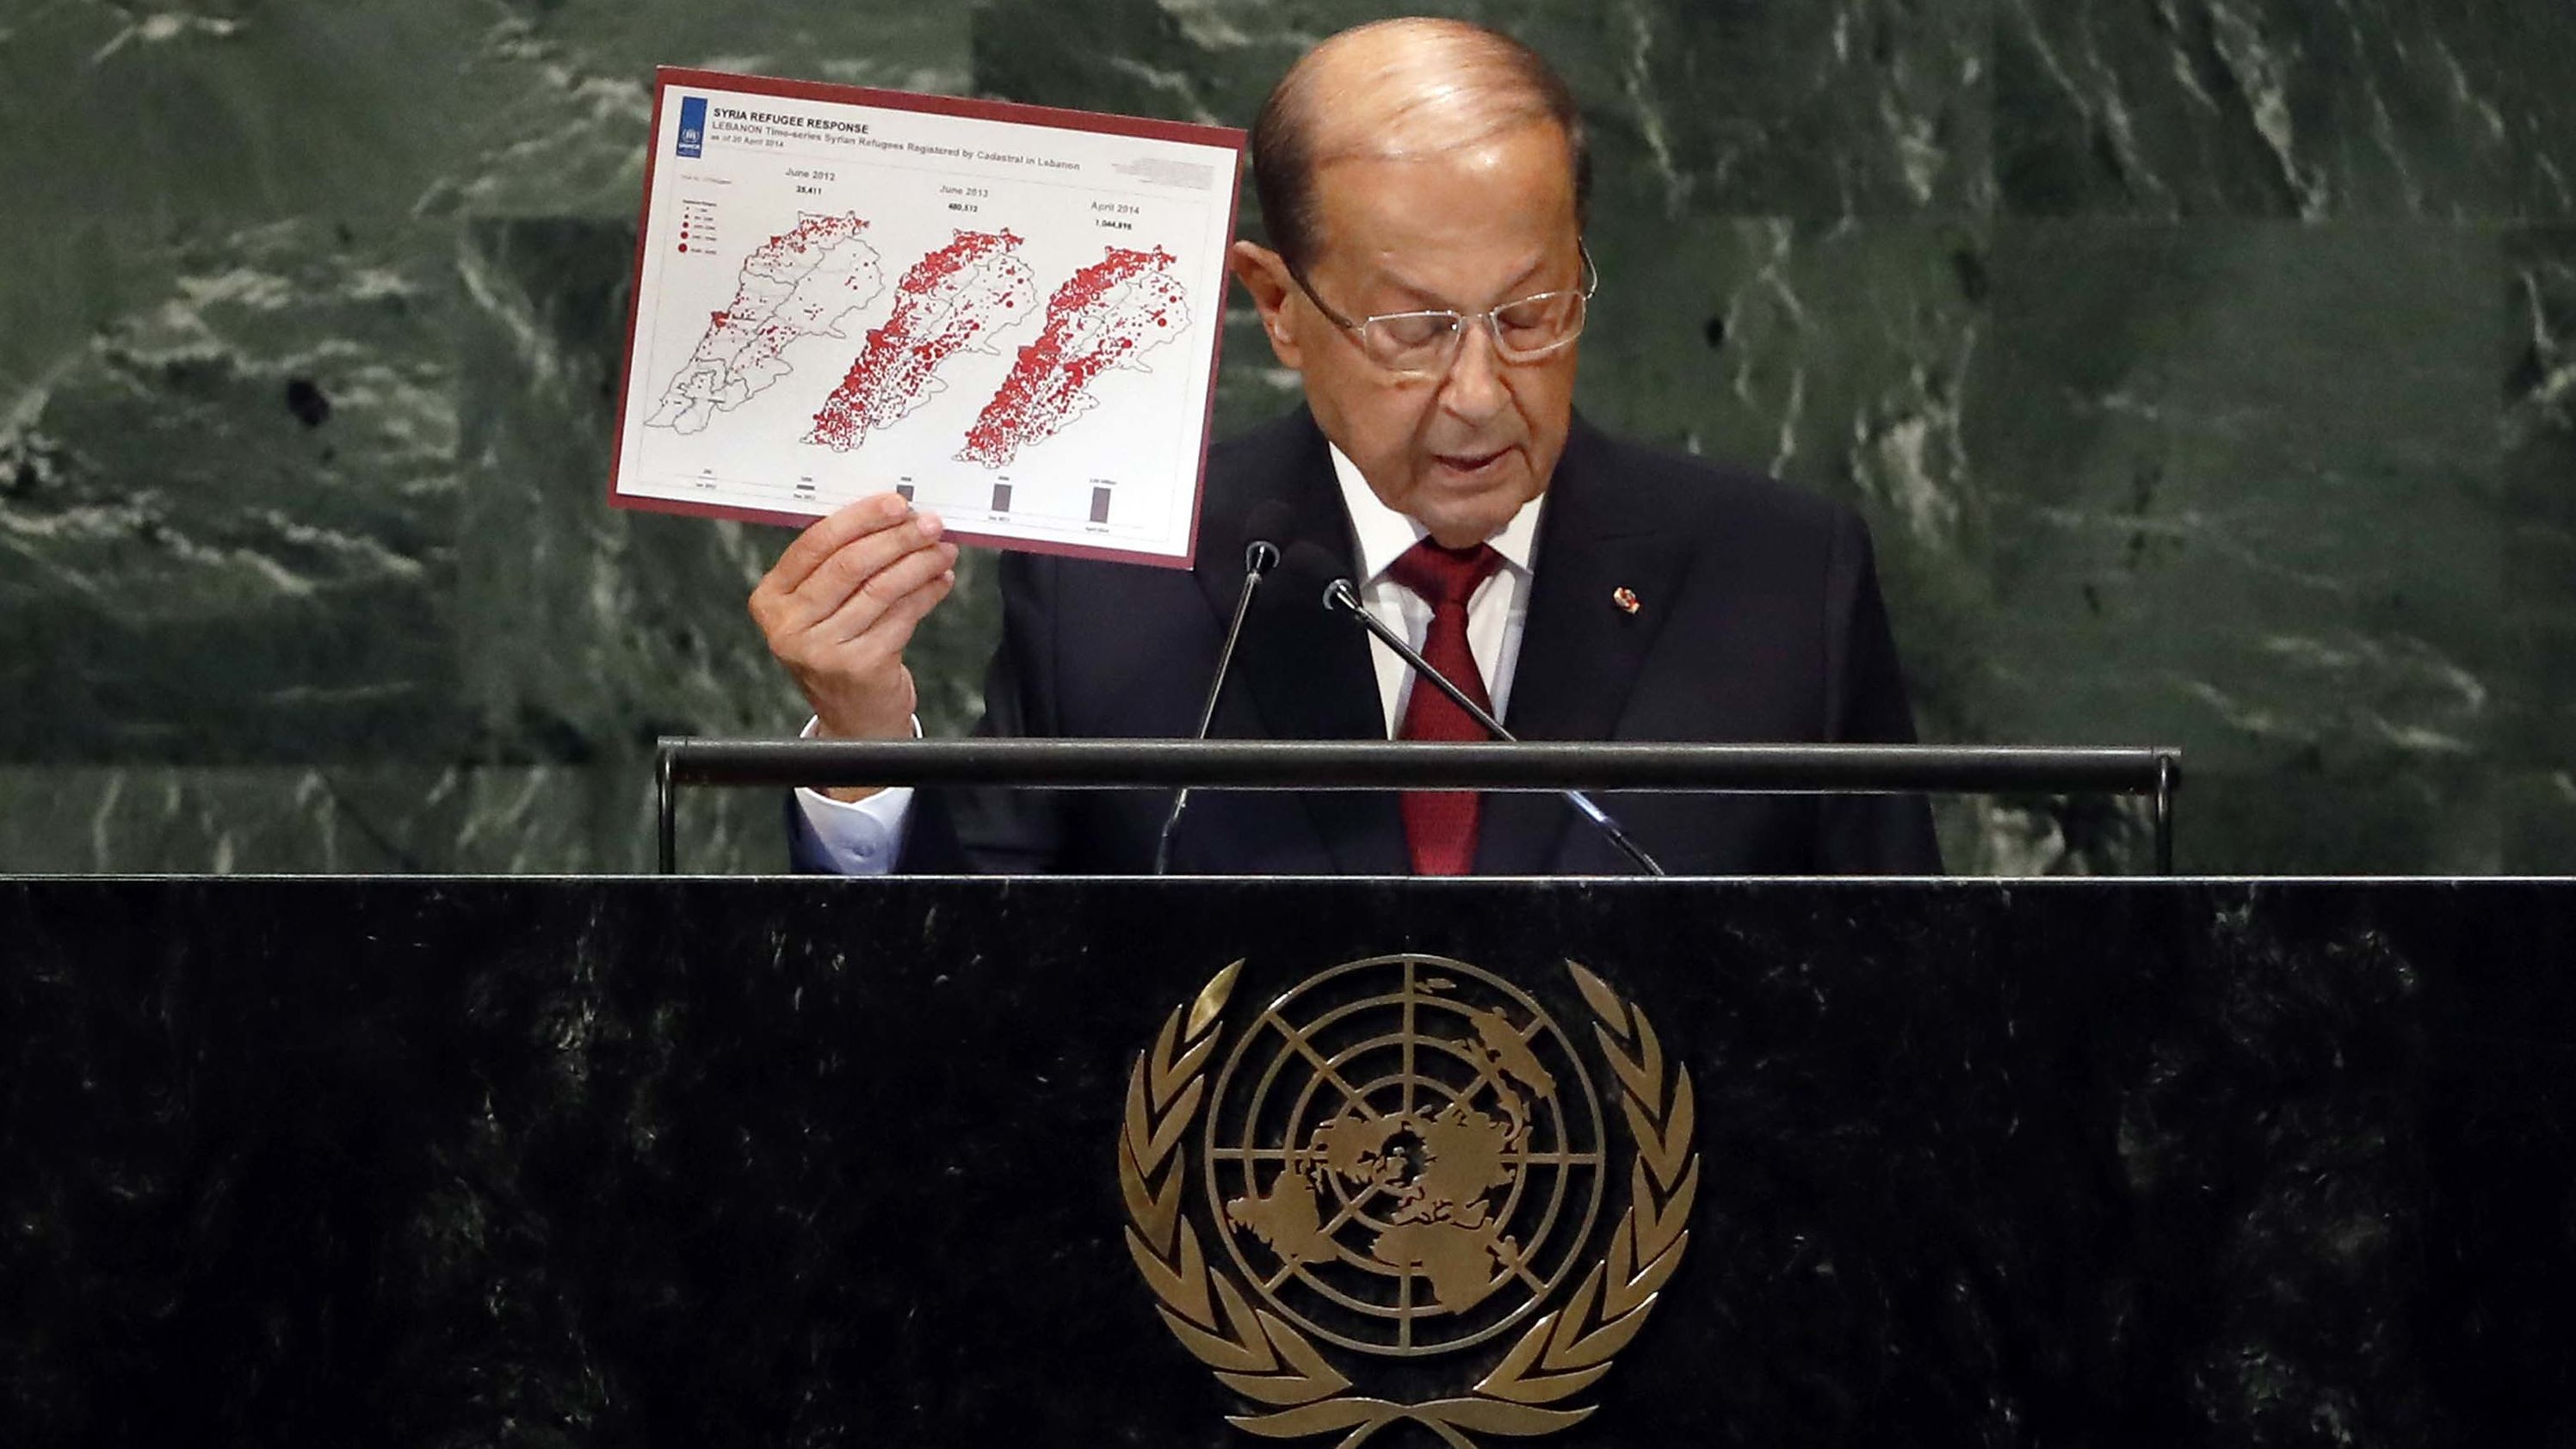 Lebanese President Michel Aoun talks about Syrian refugees as he addresses the General Assembly on Wednesday.